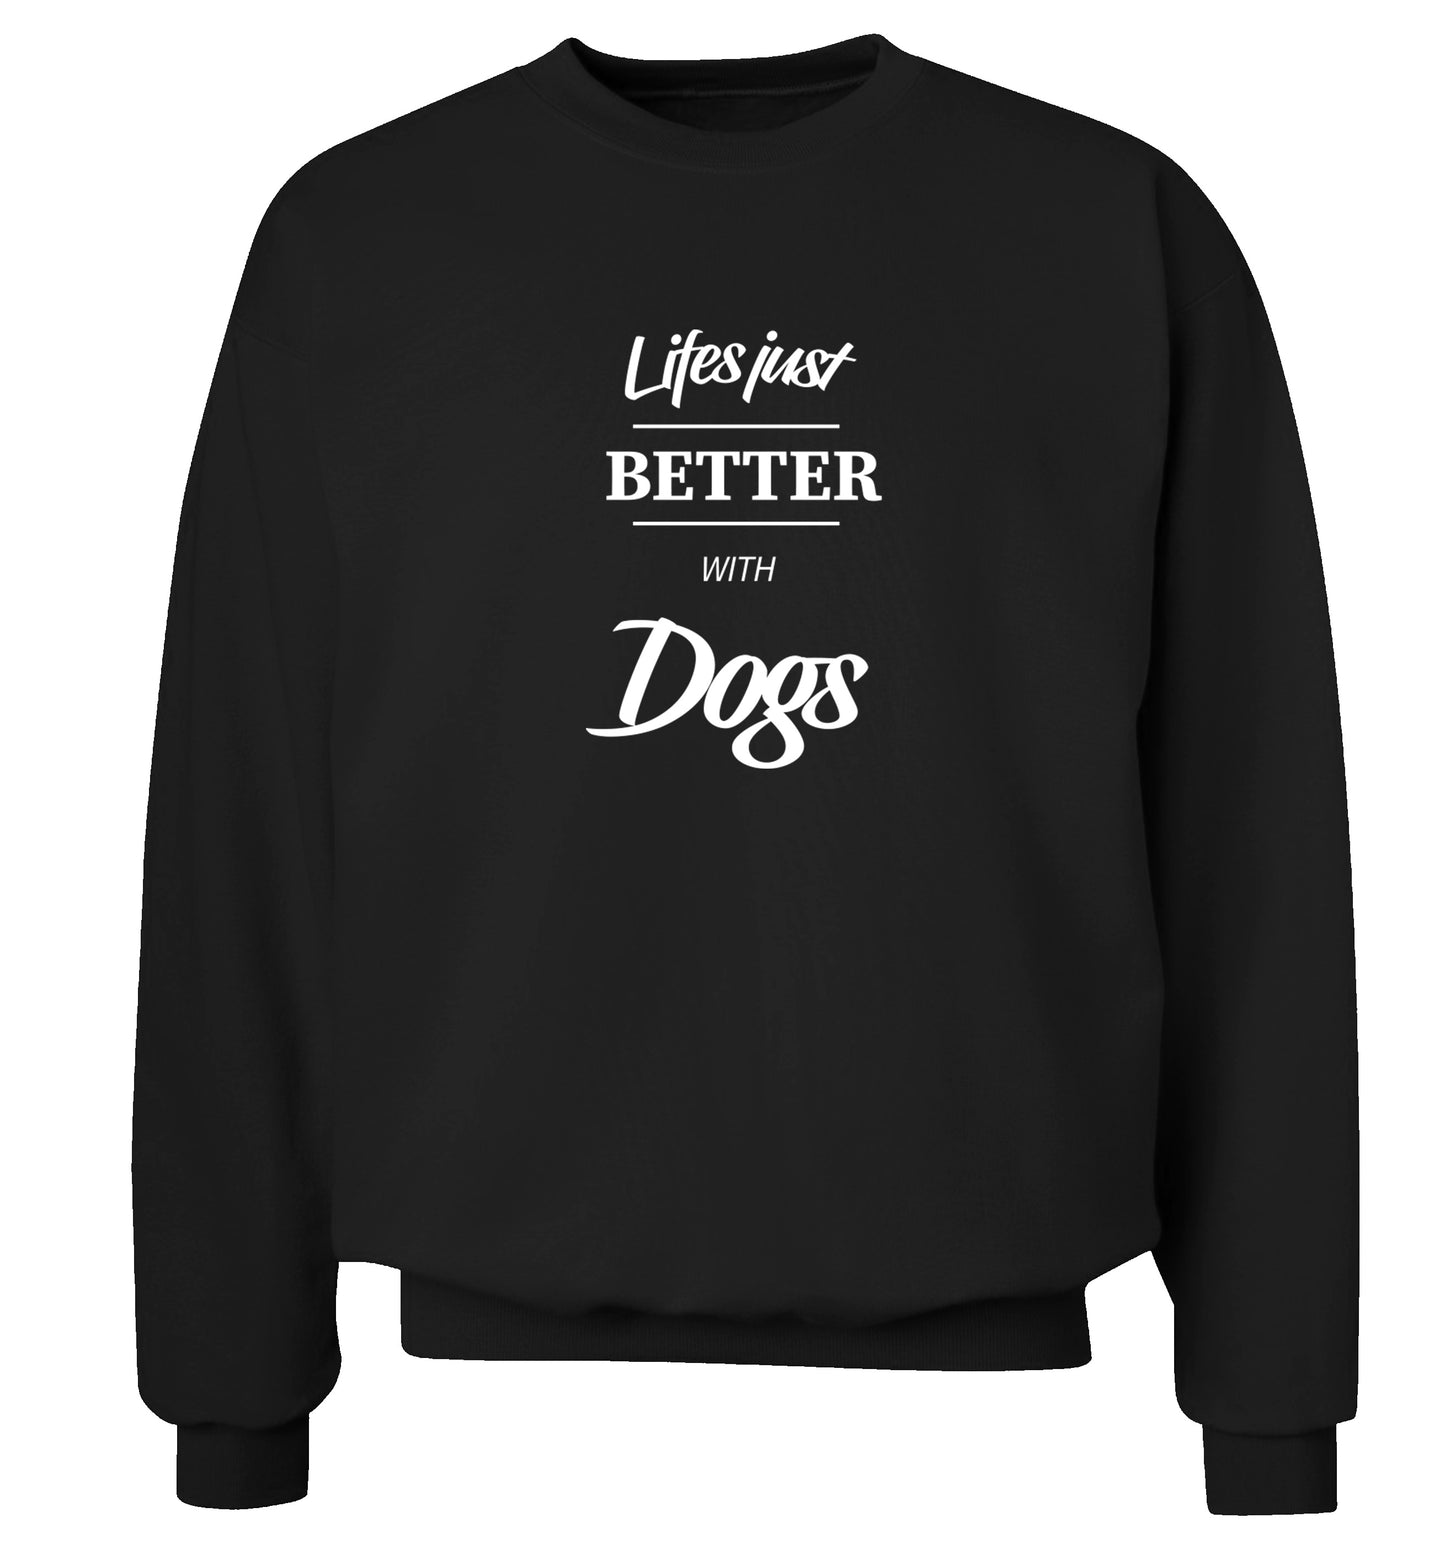 life is better with dogs Adult's unisex black Sweater 2XL